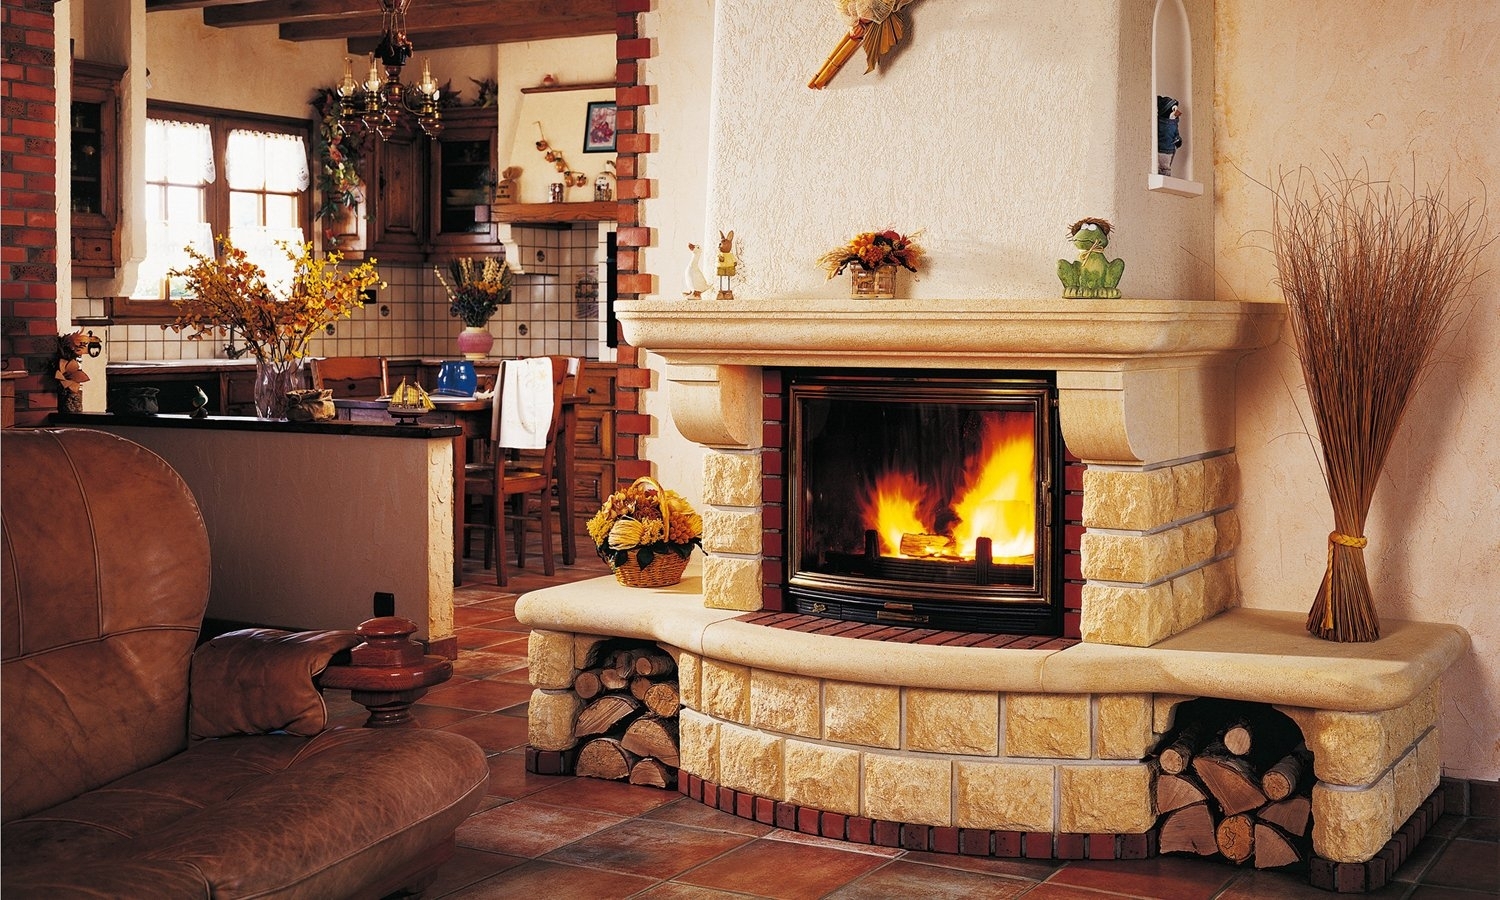 Buy Fireplaces in Israel on the bulletin board